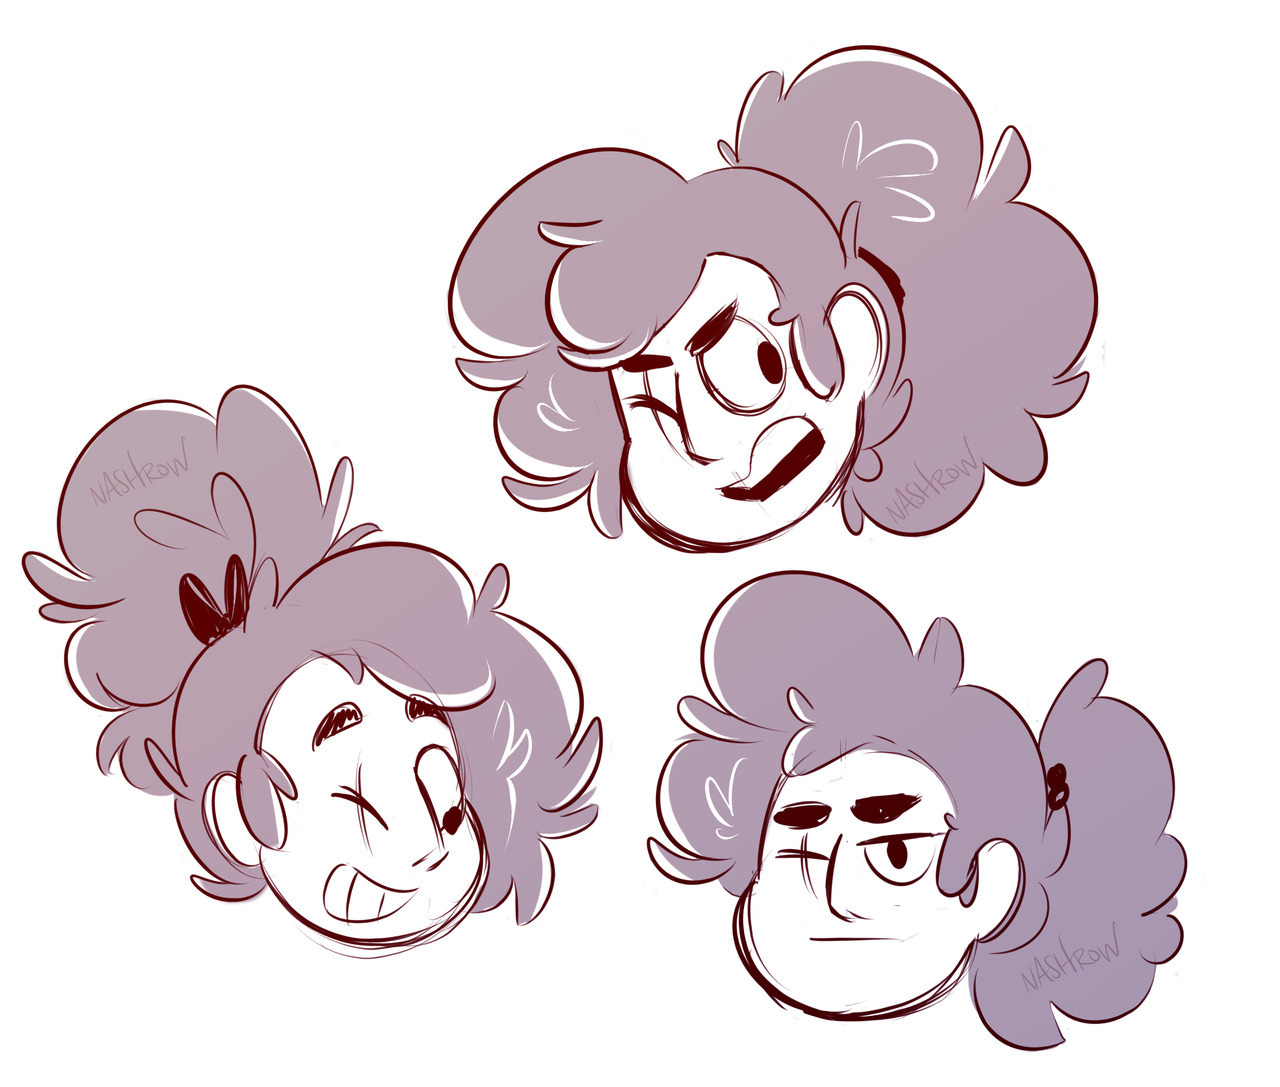 More Stevonnie sketches with Steven’s eye injury just because.